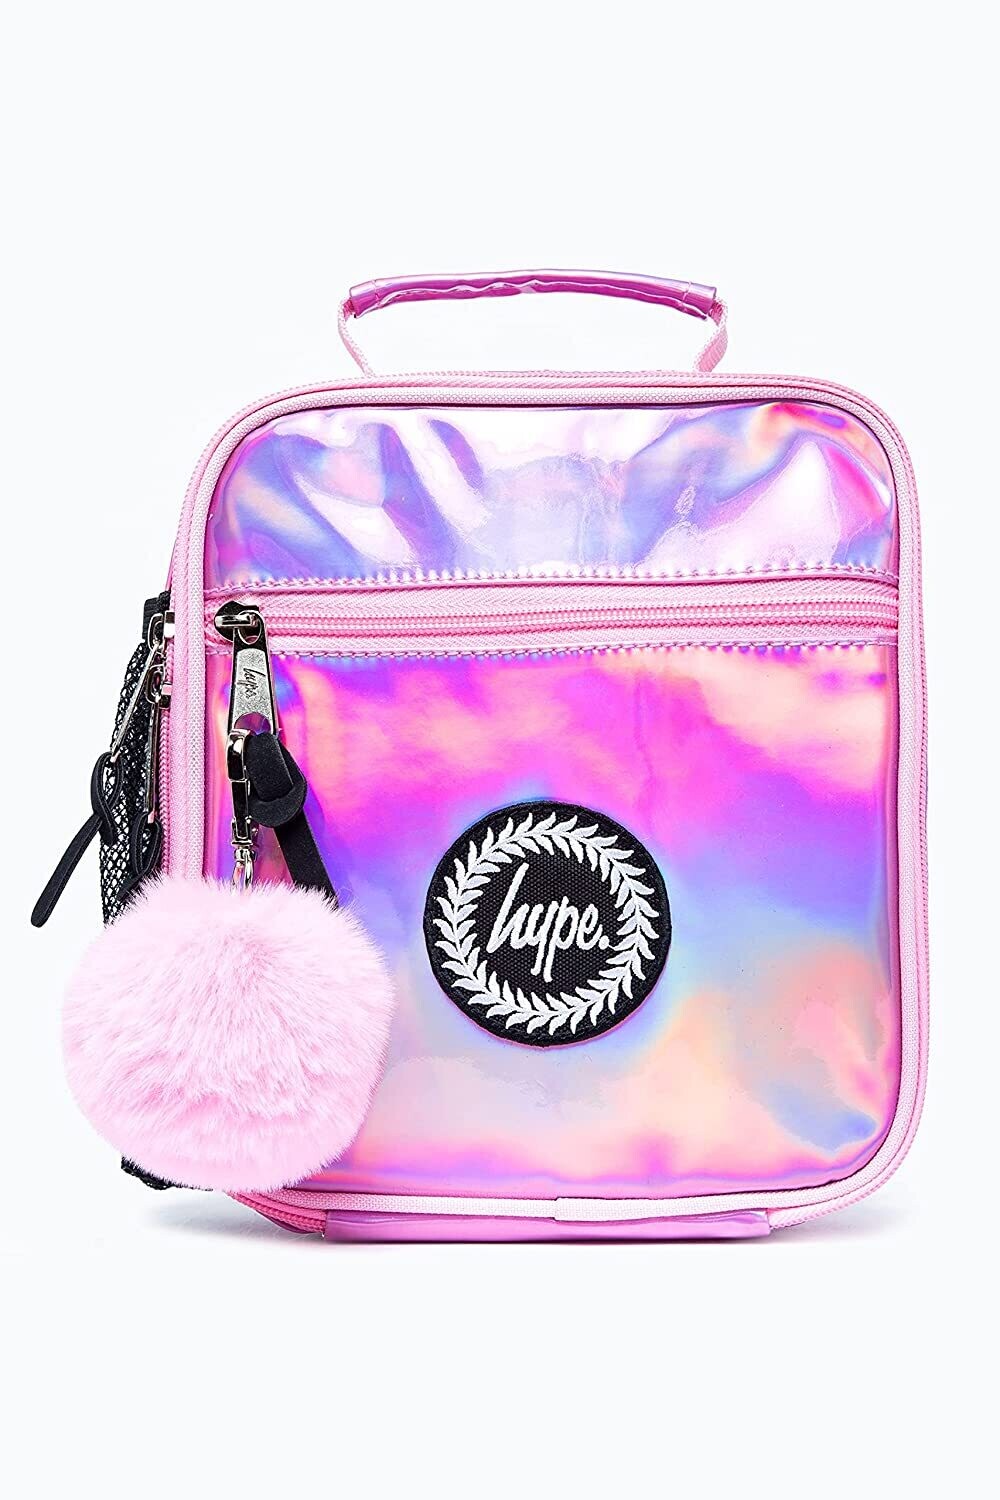 HYPE PINK HOLOGRAPHIC LUNCH BAG - One Size / Multi